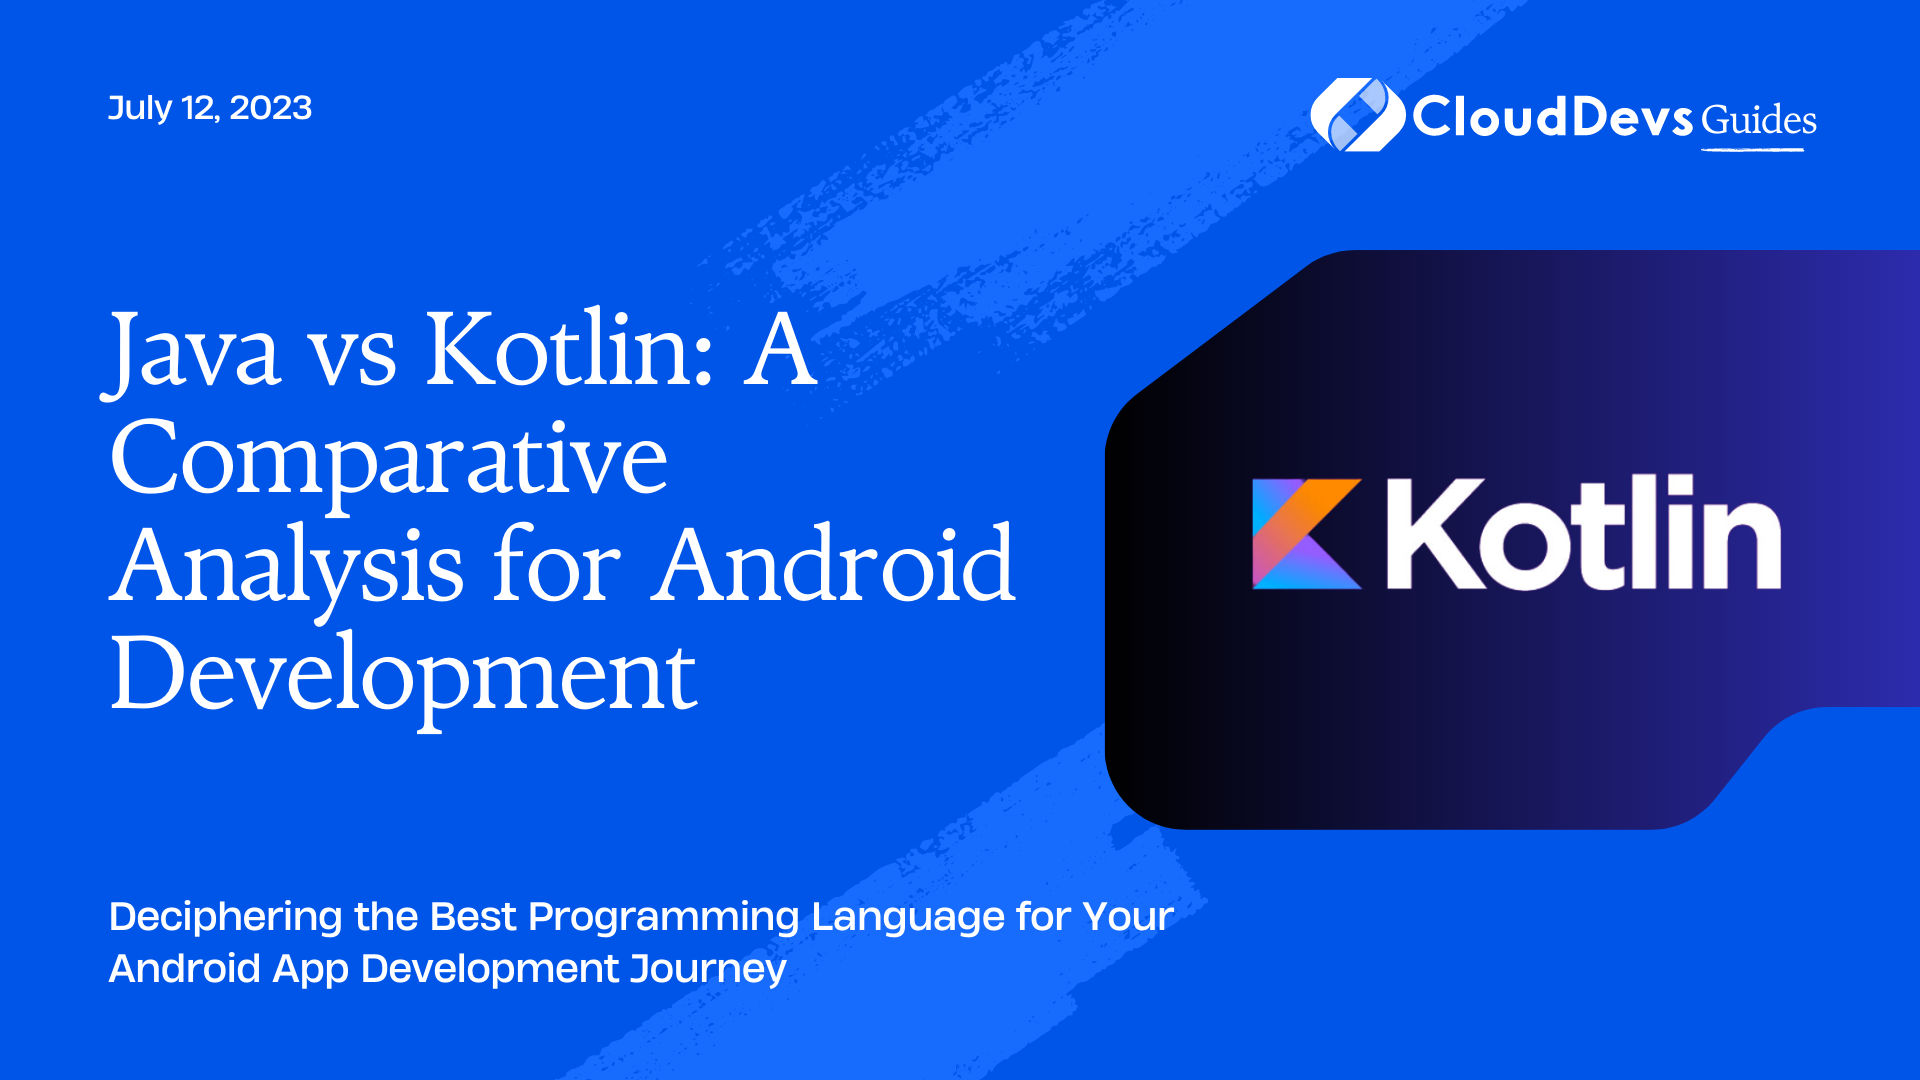 Java vs Kotlin: A Comparative Analysis for Android Development